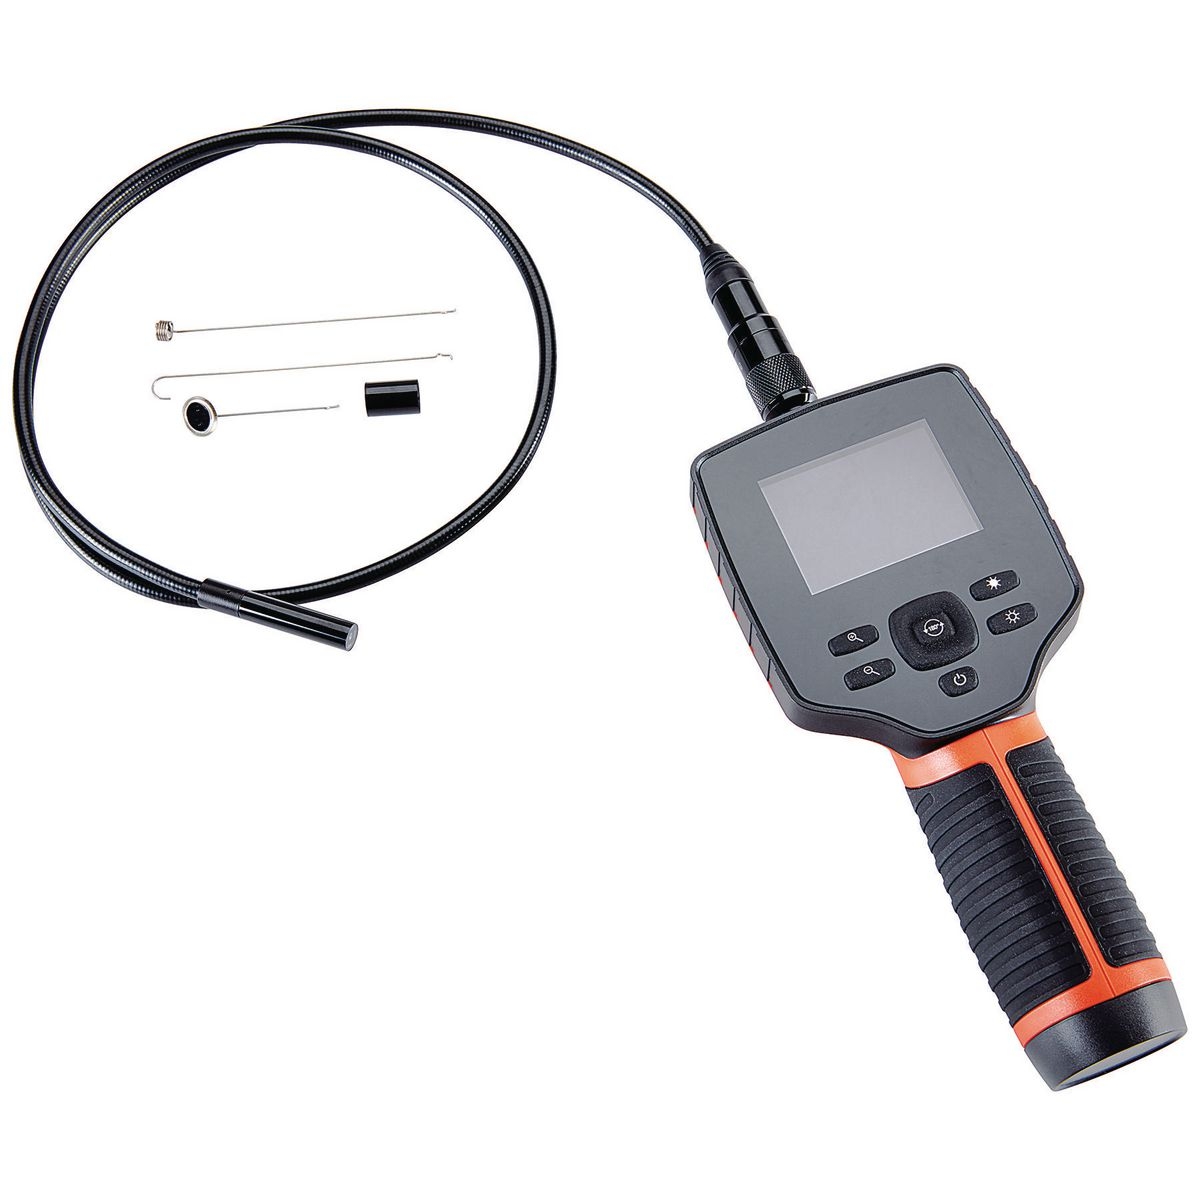 AMES INSTRUMENTS 2.7 in. Color Compact Digital Inspection Camera – Item